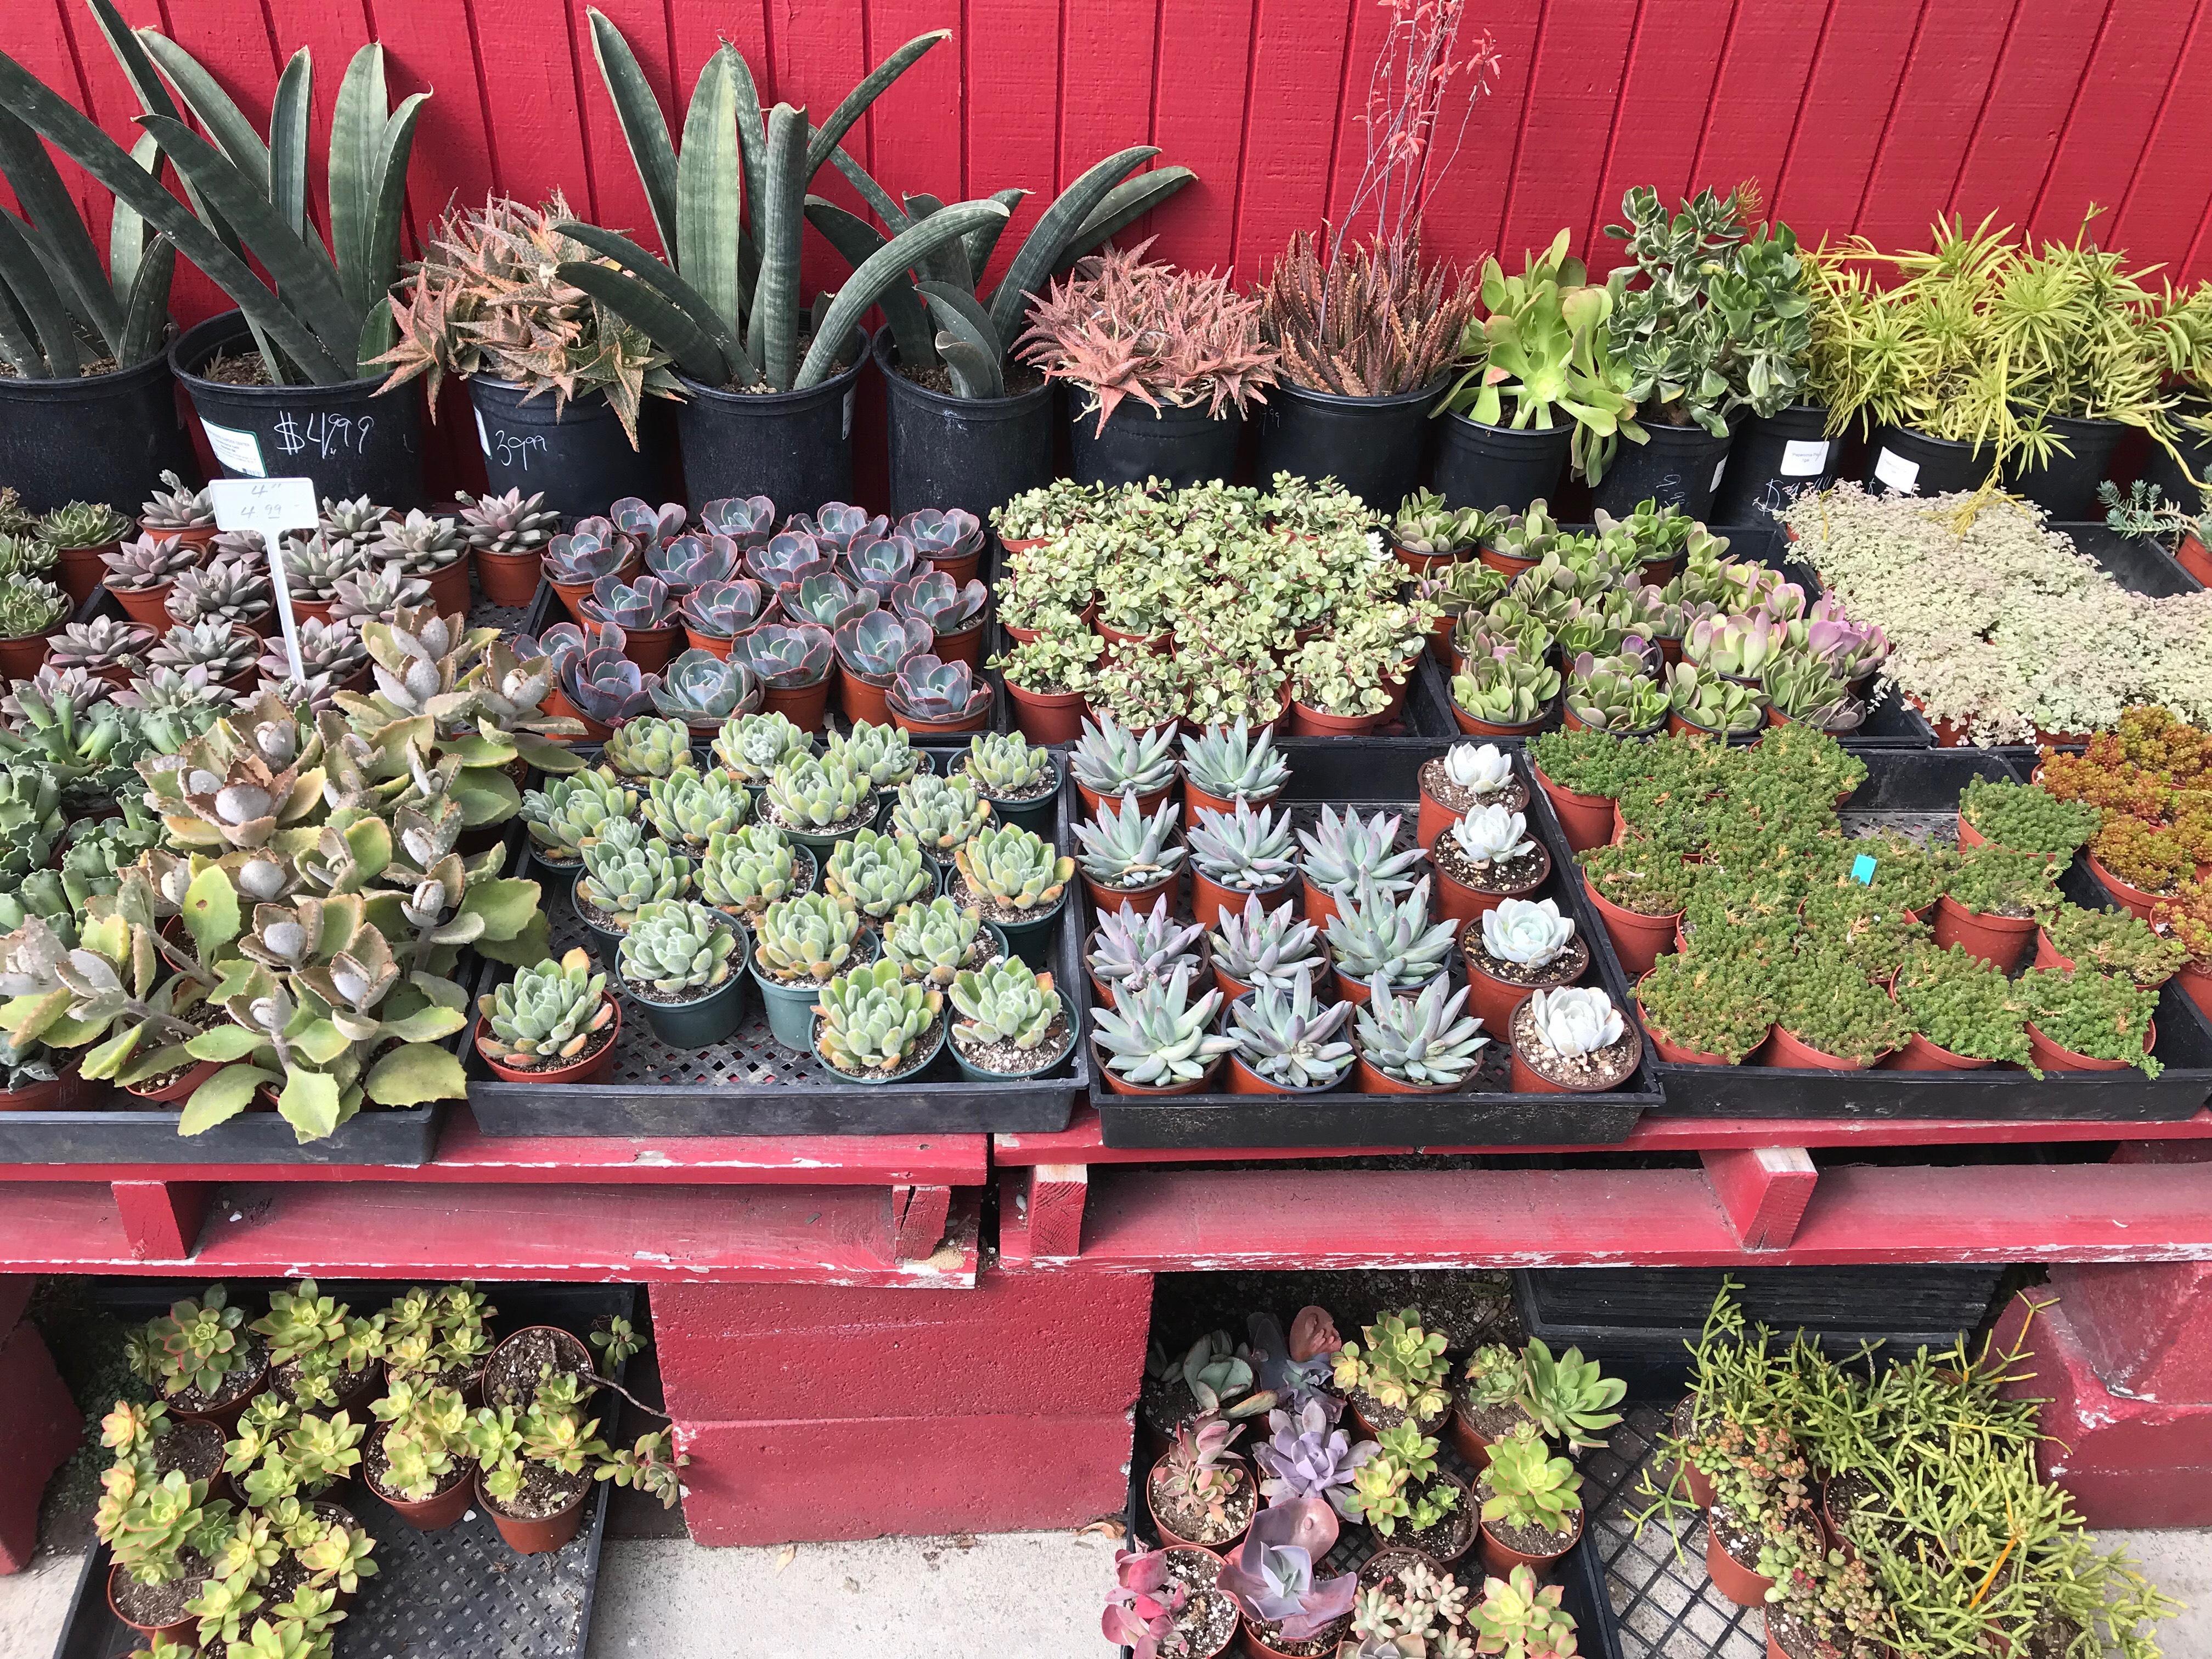 Great selection of succulents.